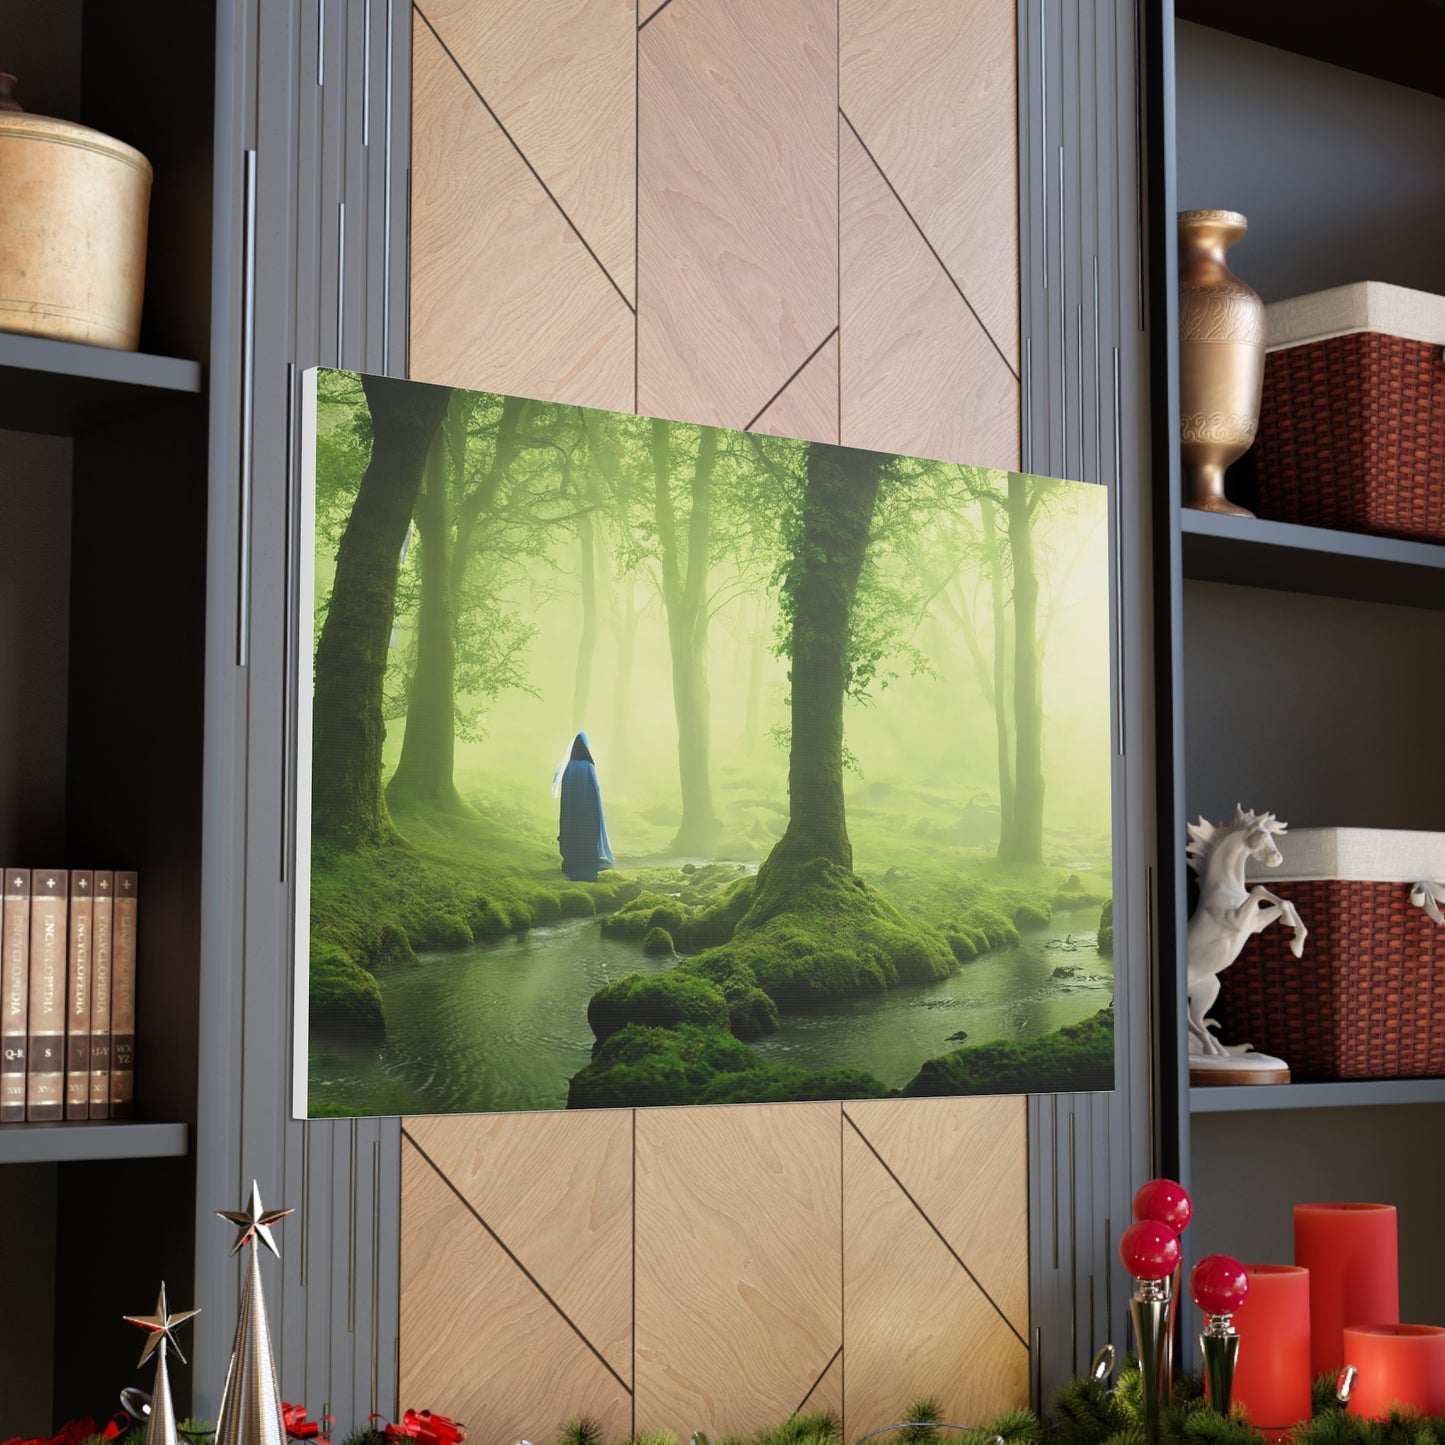 A Walk in the Mystic Forest of Life - Canvas Gallery Wraps